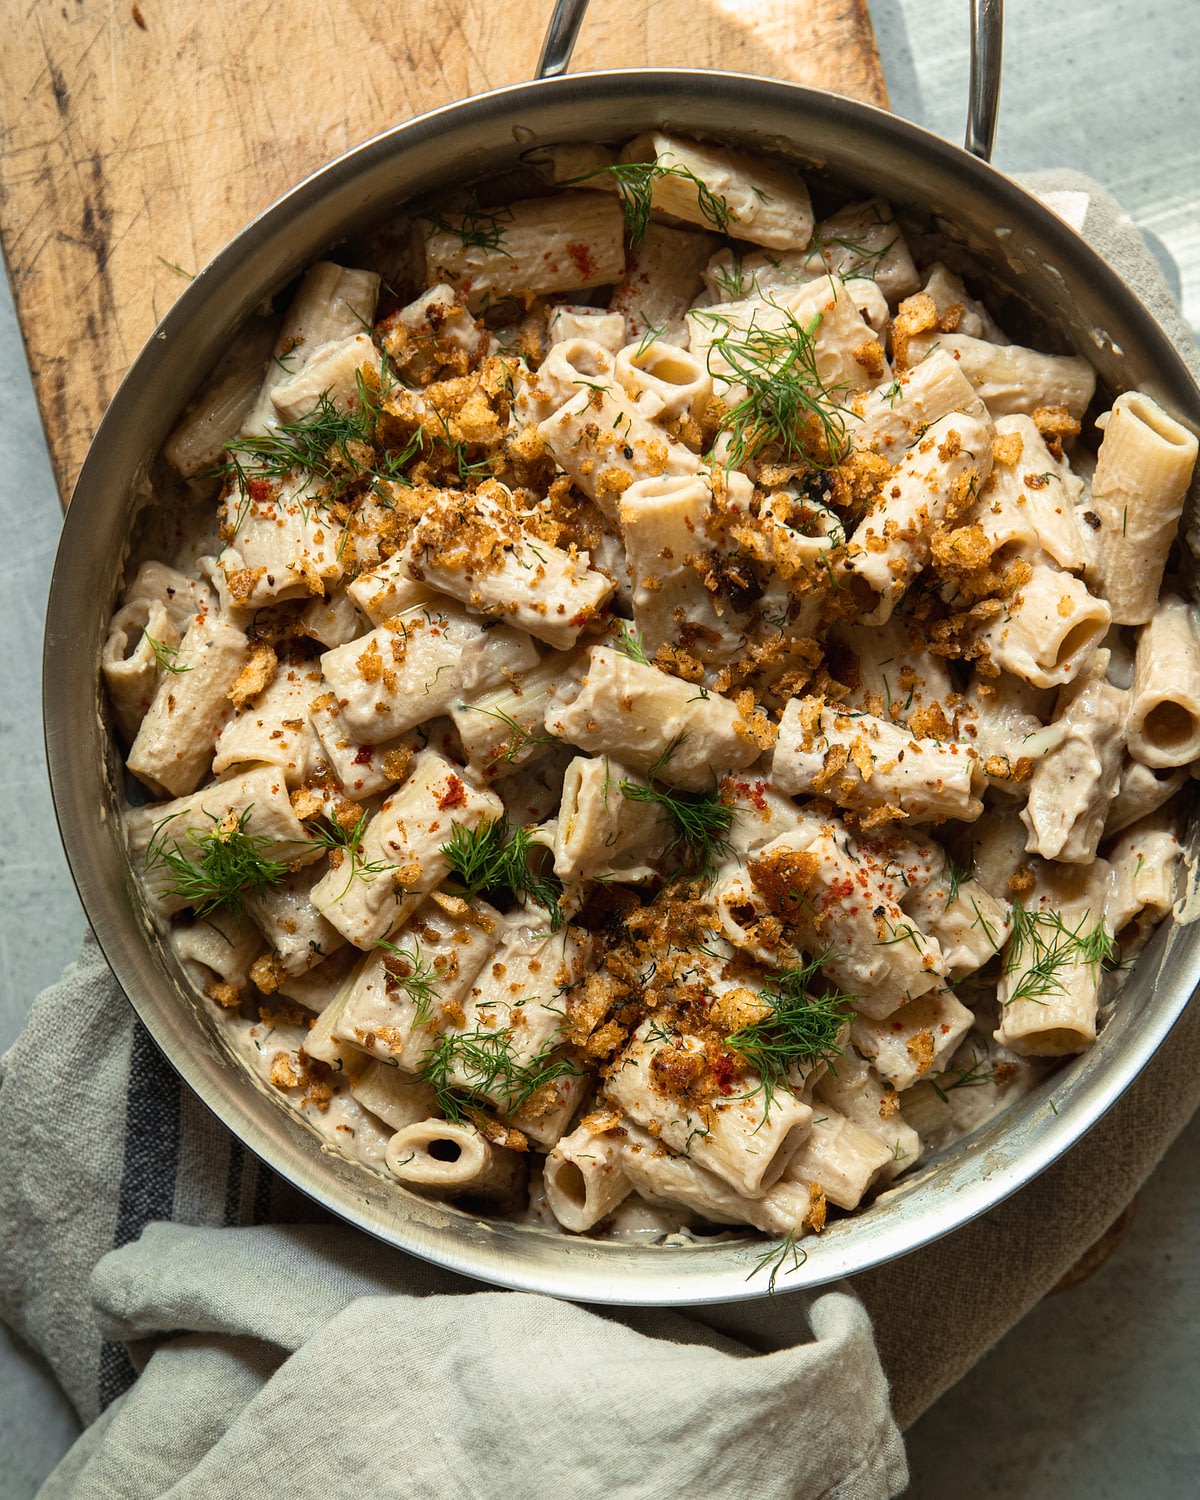 An overhead image of a creamy rigatoni pasta in a stainless steel frying pan. The pasta is topped with golden crunchy breadcrumbs, chili flakes, and chopped bits of fresh dill.